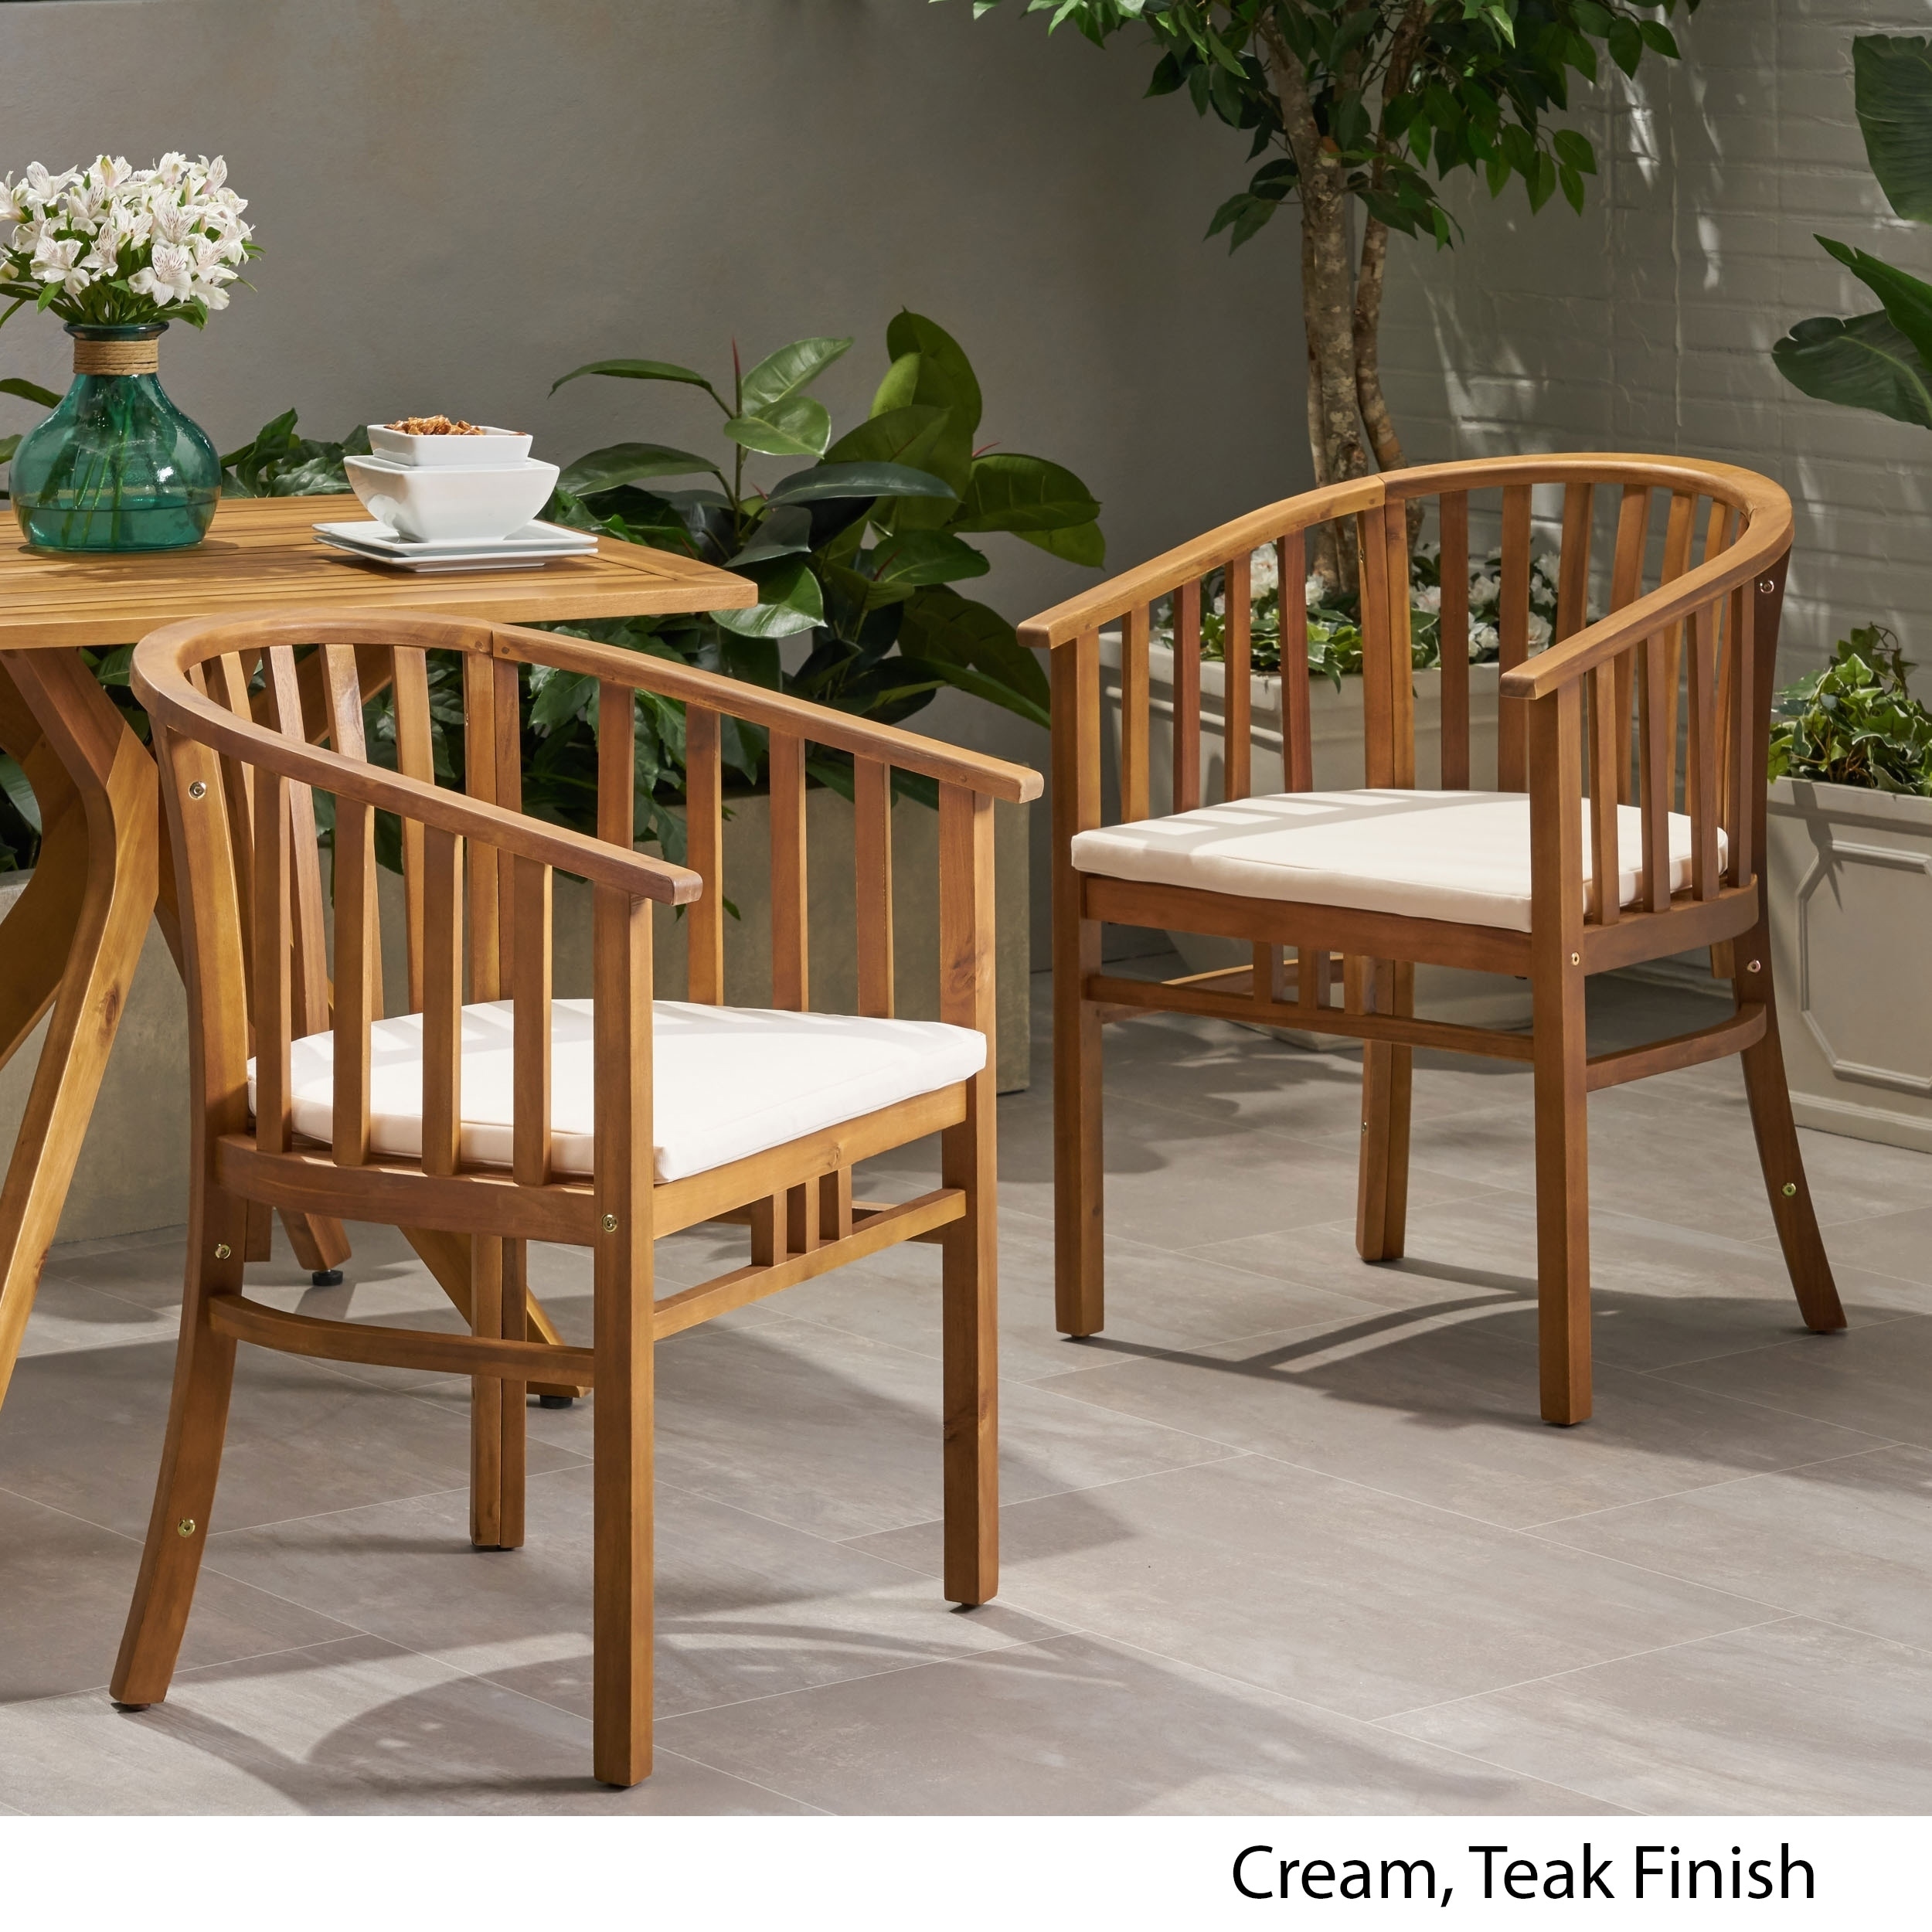 Shop Alondra Outdoor Wooden Dining Chairs With Cushions Set Of 2 By Christopher Knight Home On Sale Overstock 27569235